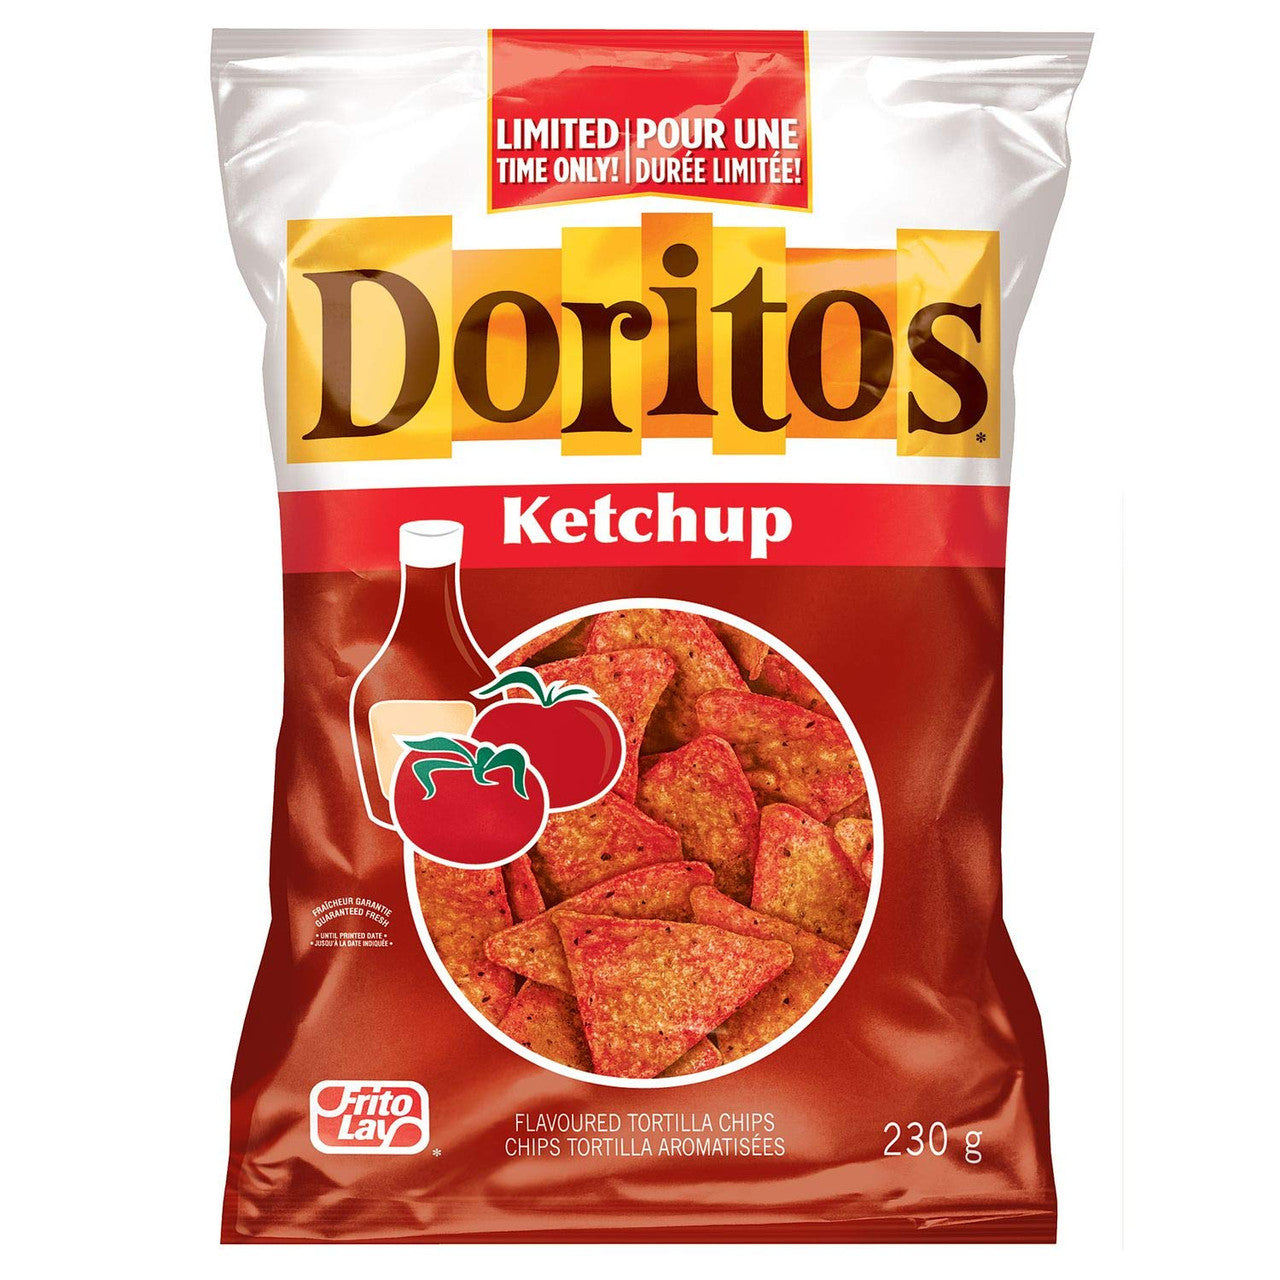 Doritos Ketchup Tortilla Chips, Limited Time, 230g/8oz, (Imported from Canada)